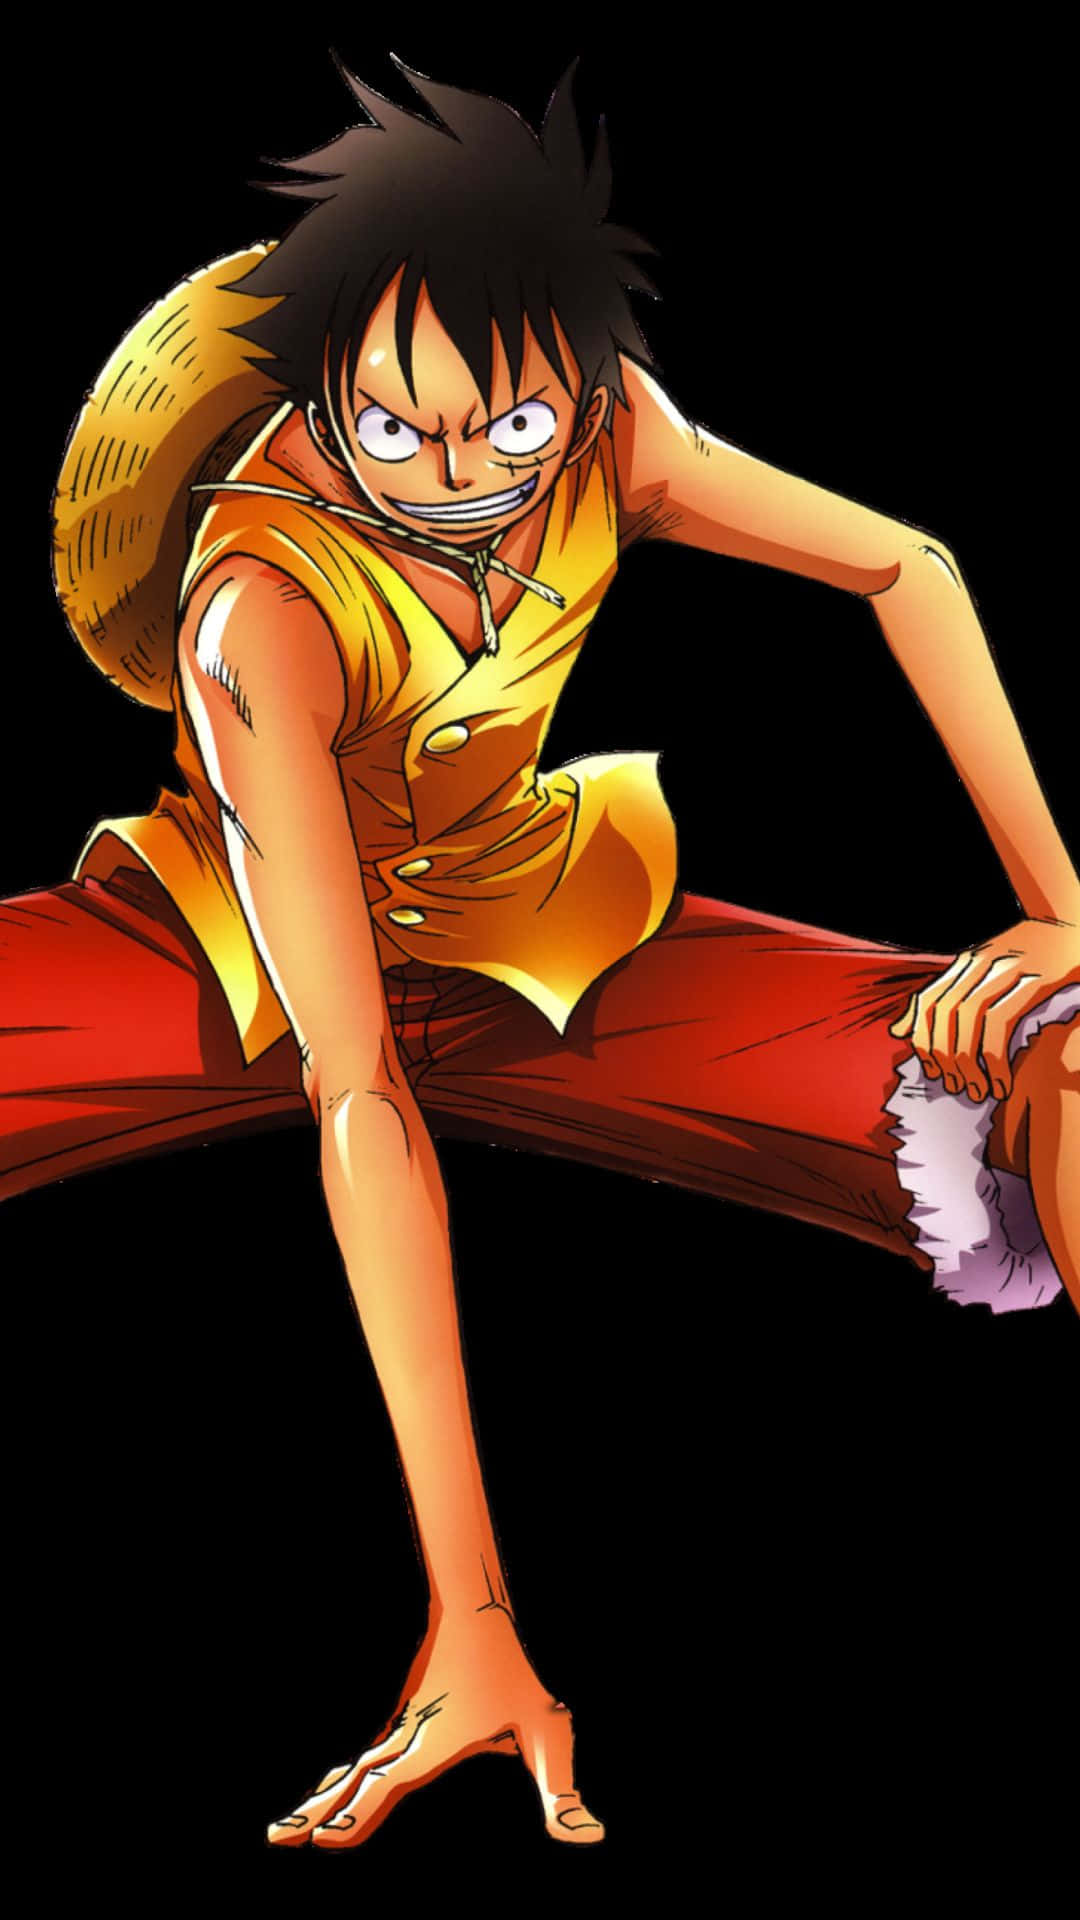 Step Into the Grand Line with Luffy and Your New One Piece Luffy Iphone Wallpaper